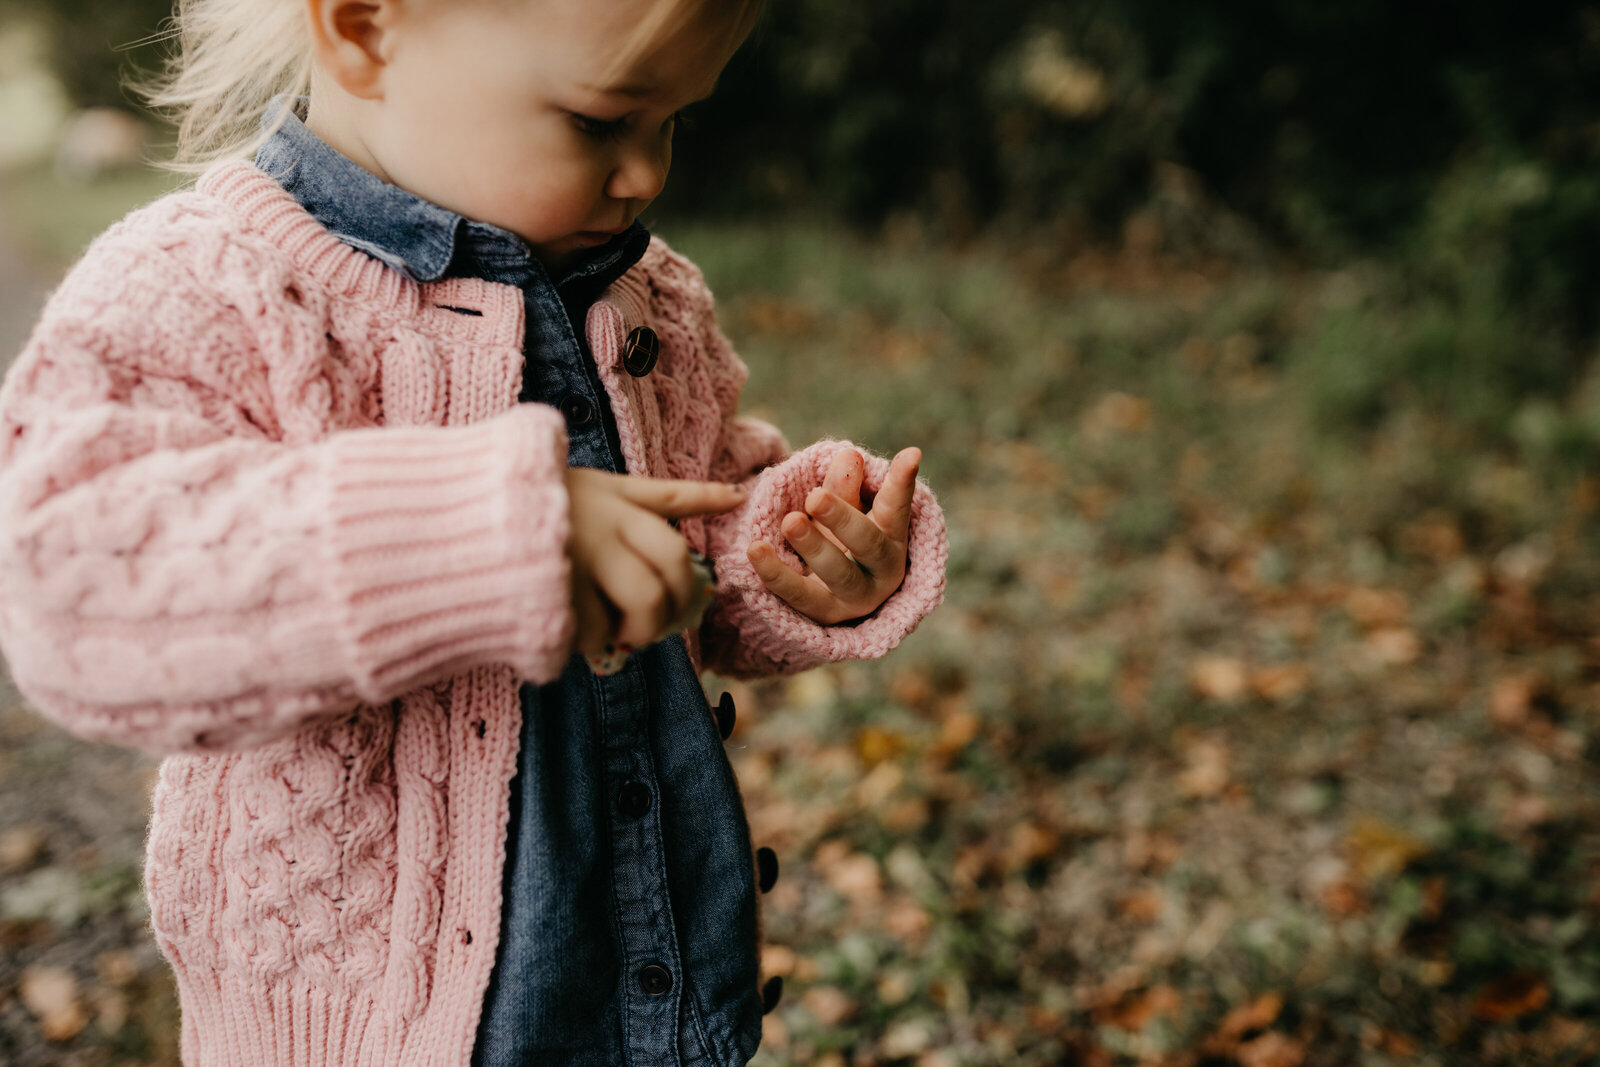 A small child holds a leaf in her hands